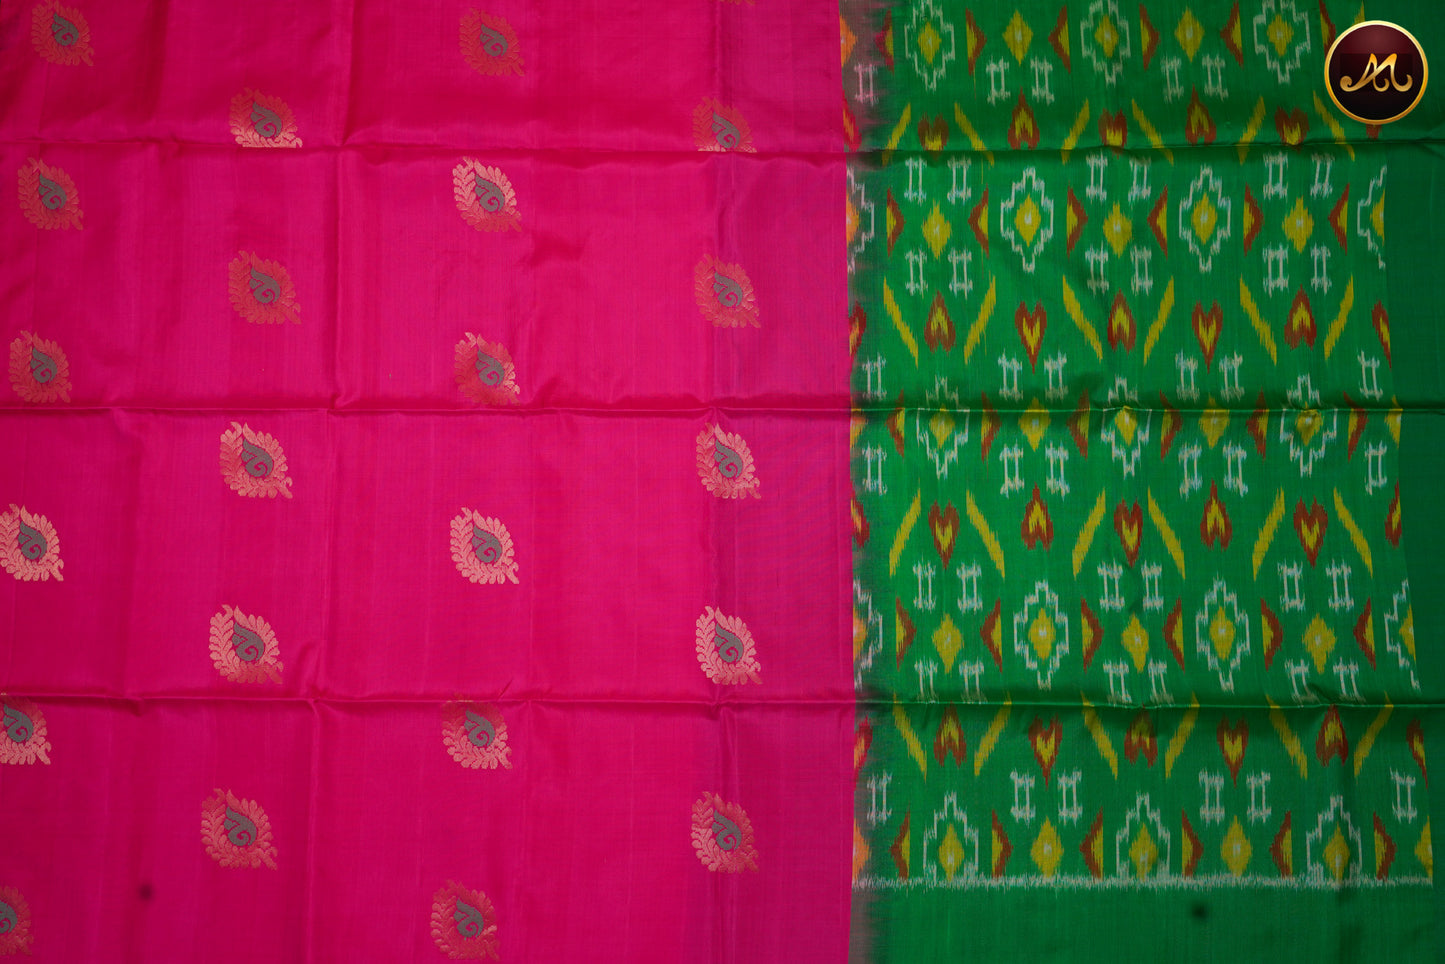 Handloom Soft silk Saree in Rani Pink and Bottle green colour combination with gold and meena butta allover the body and Ikat Pallu